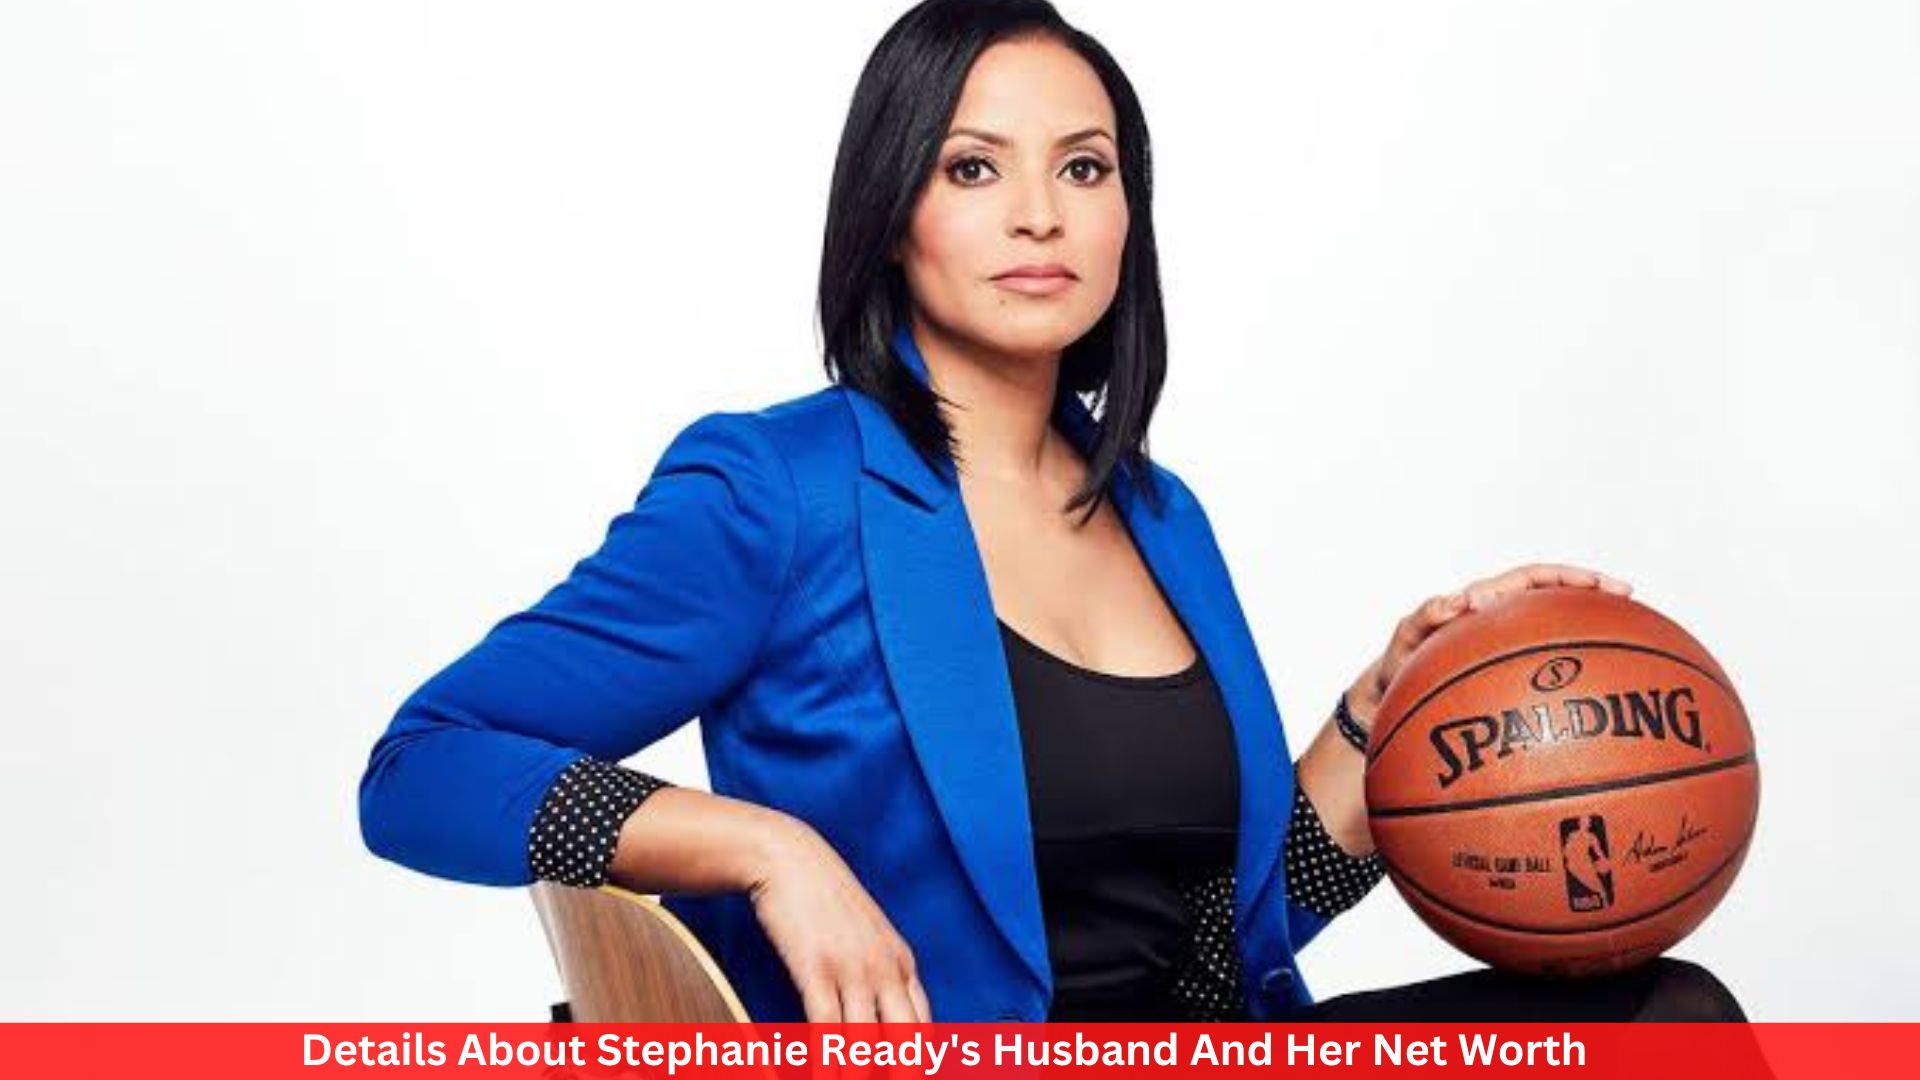 Details About Stephanie Ready's Husband And Her Net Worth